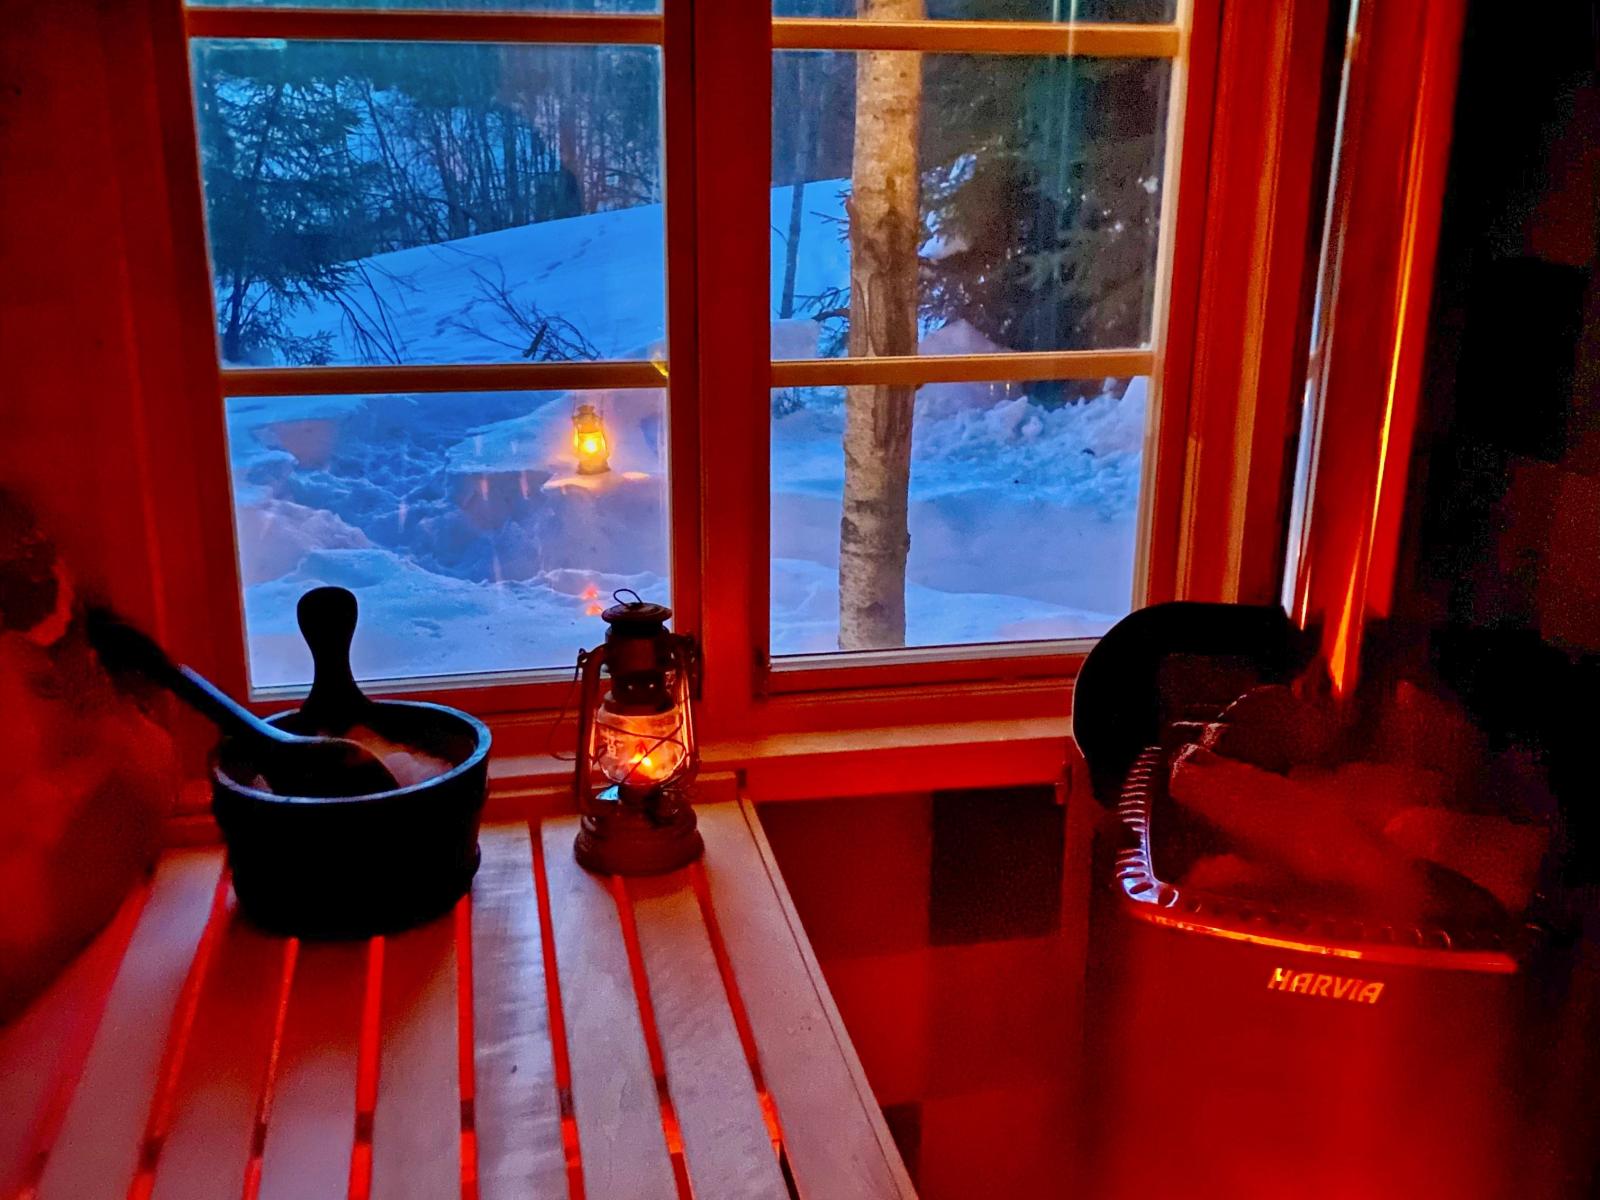 Winter Glamping in the High Coast